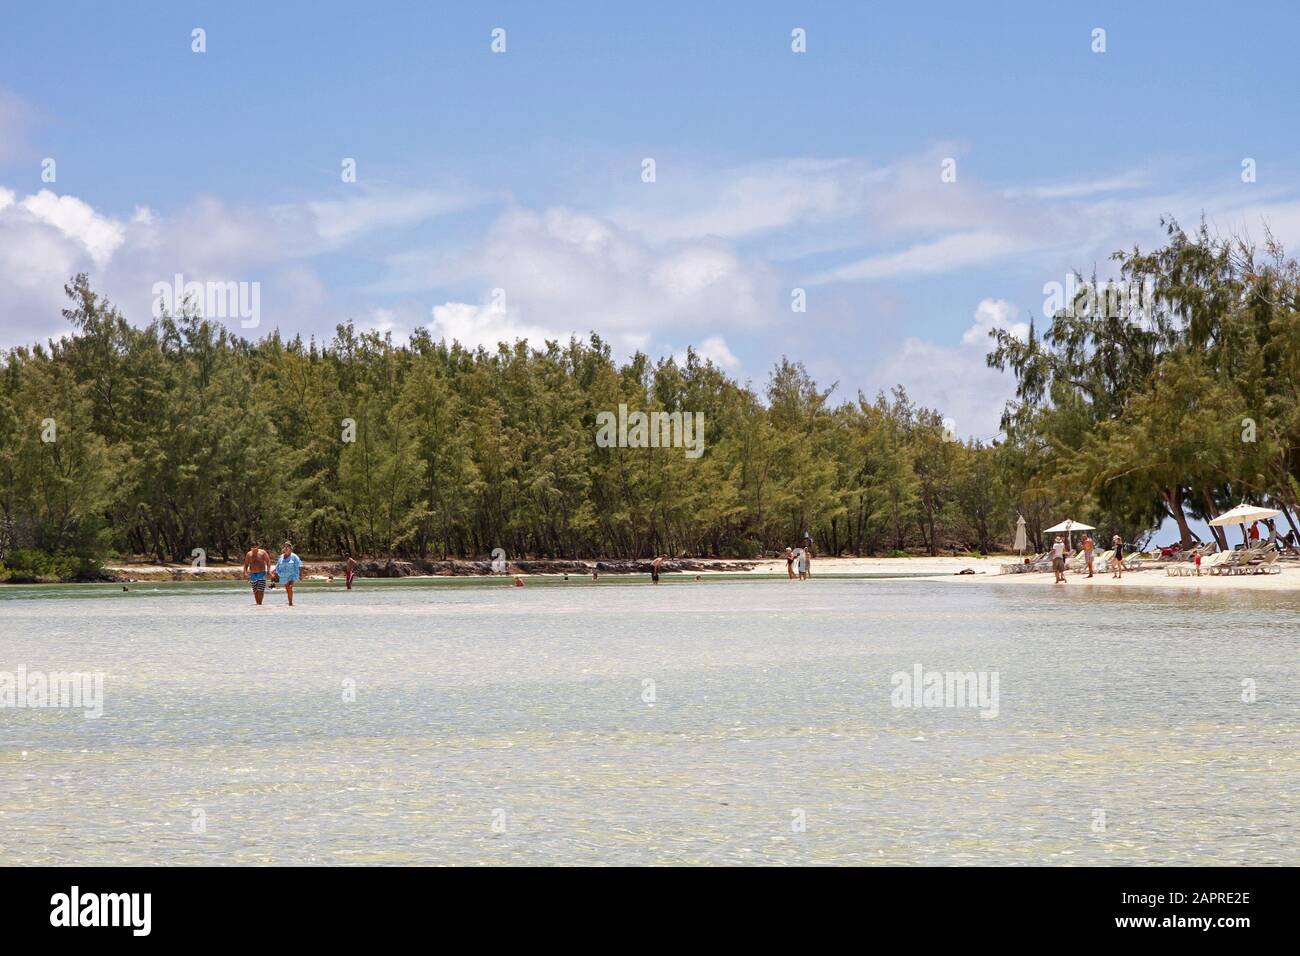 People and pine forest on beach along the coast of Mauritius. Stock Photo